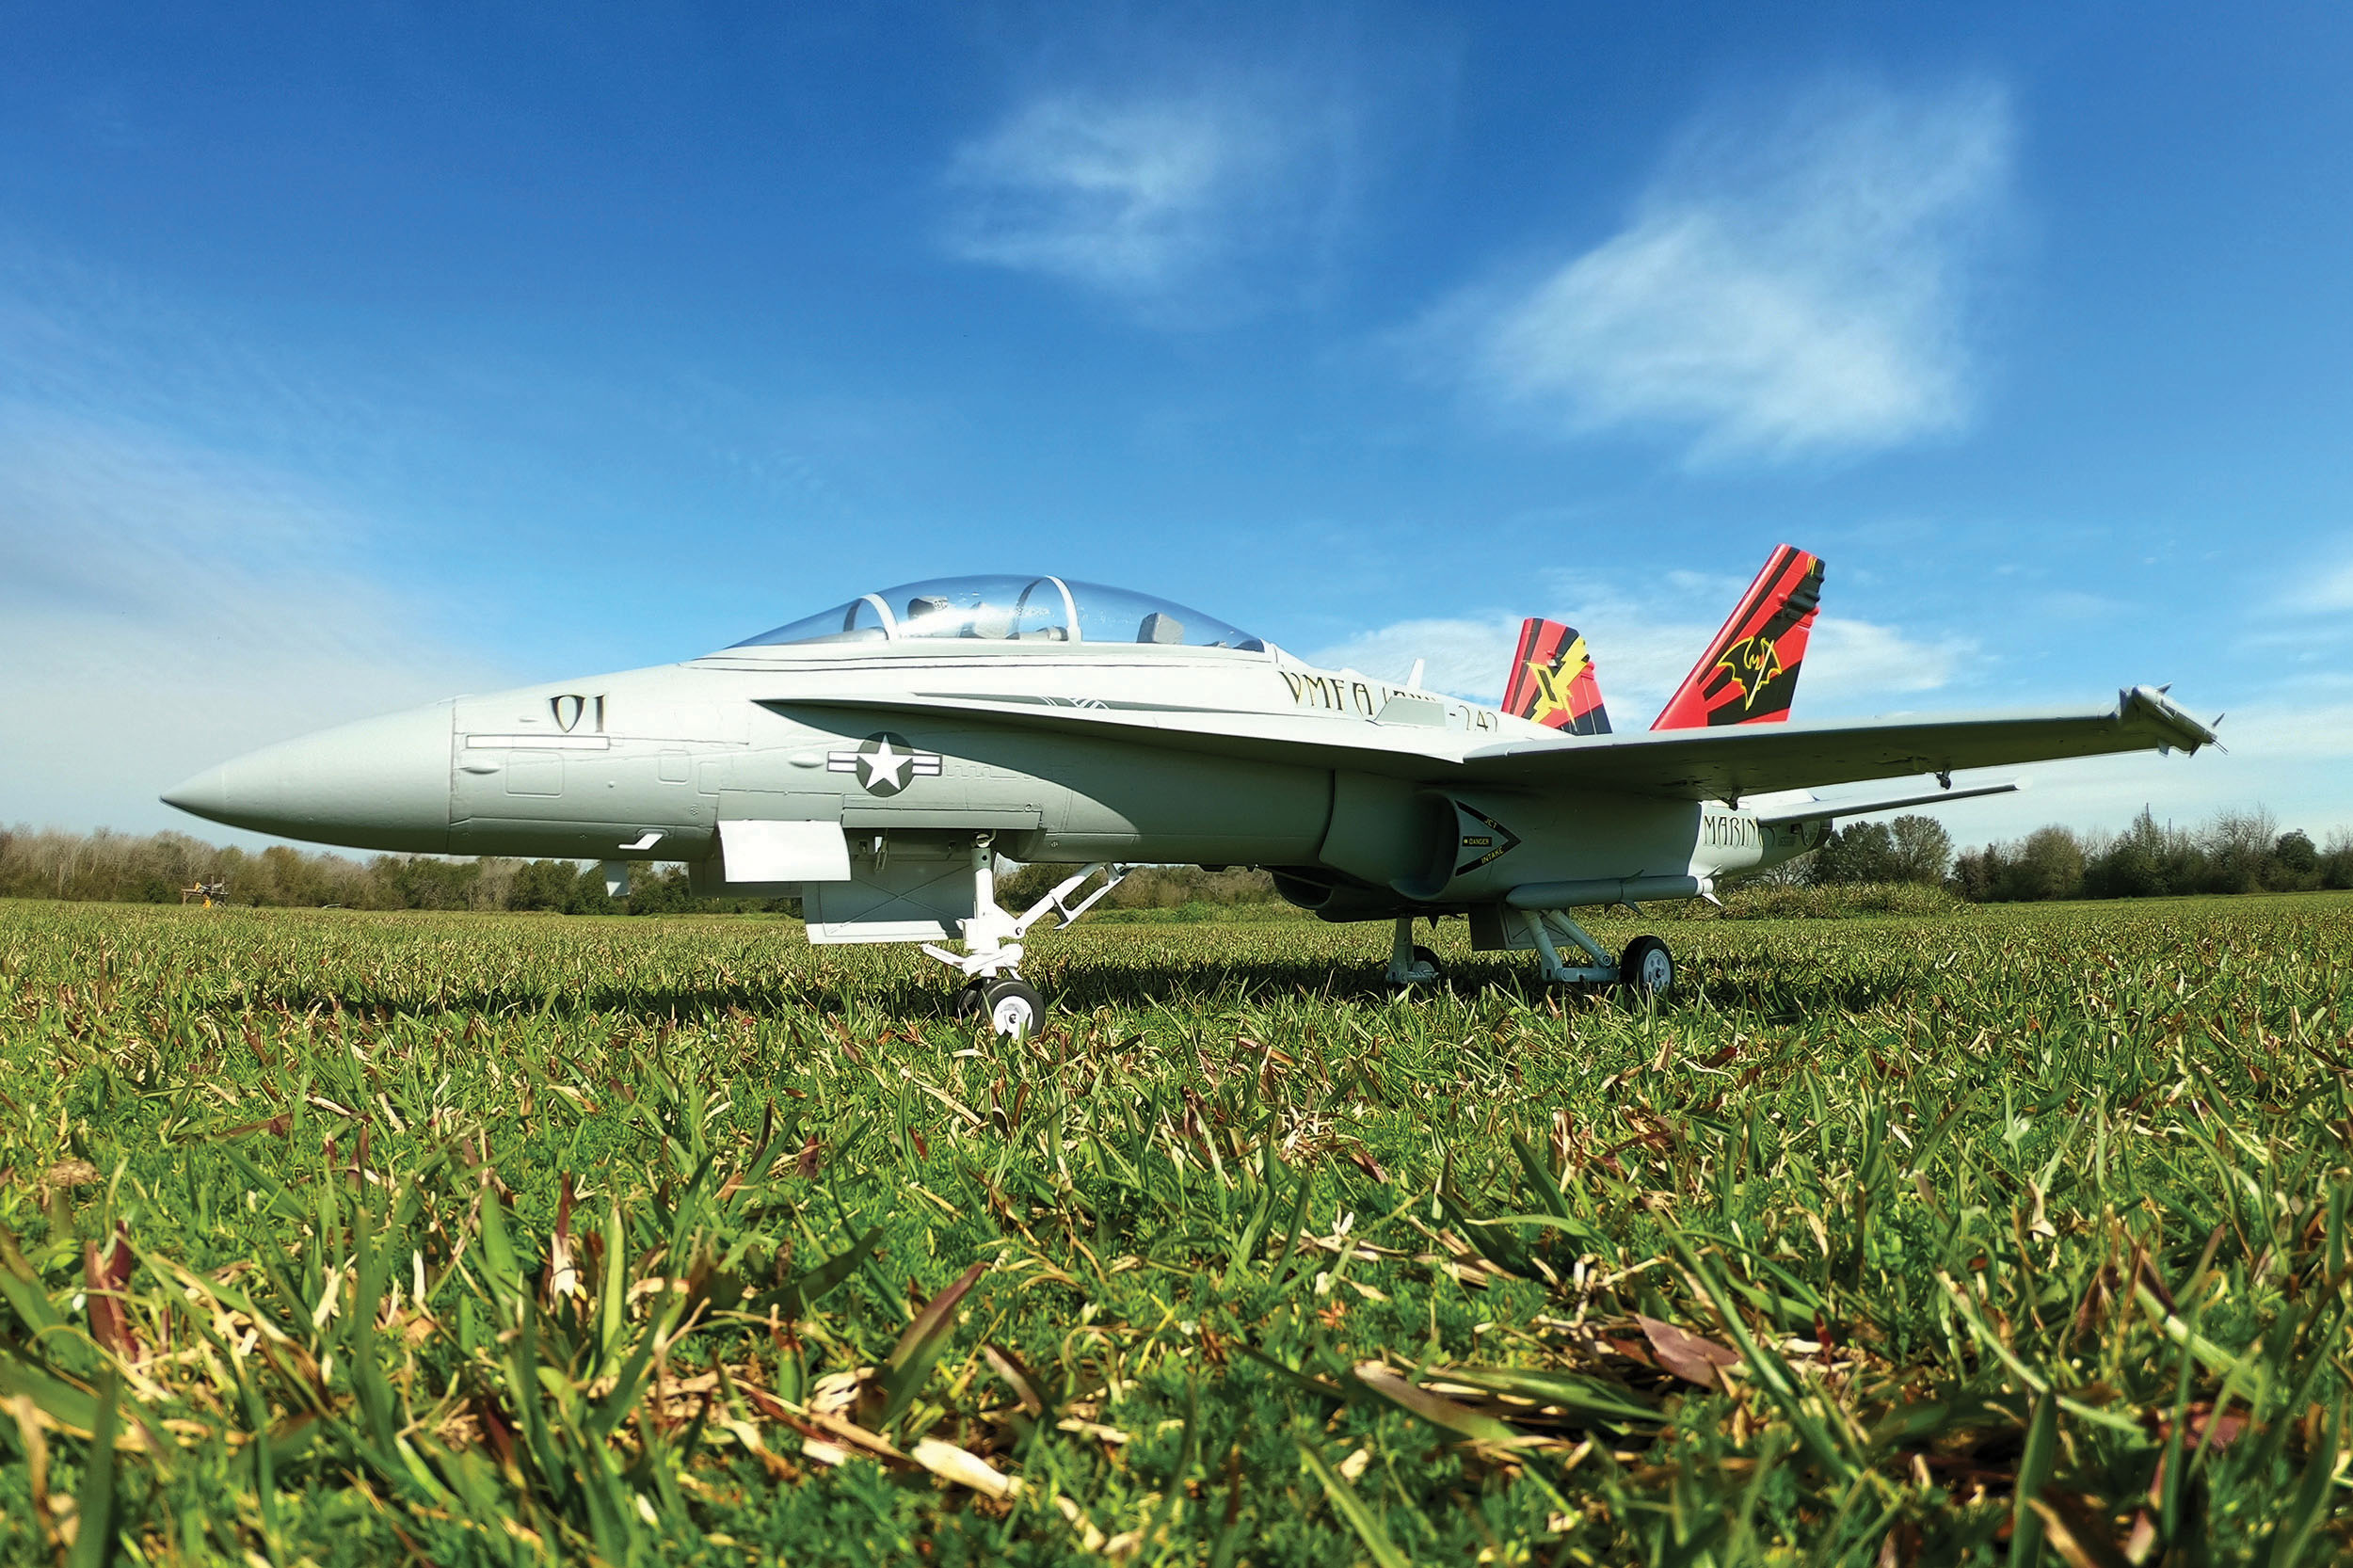 the author has flown the f 18 from a grass field